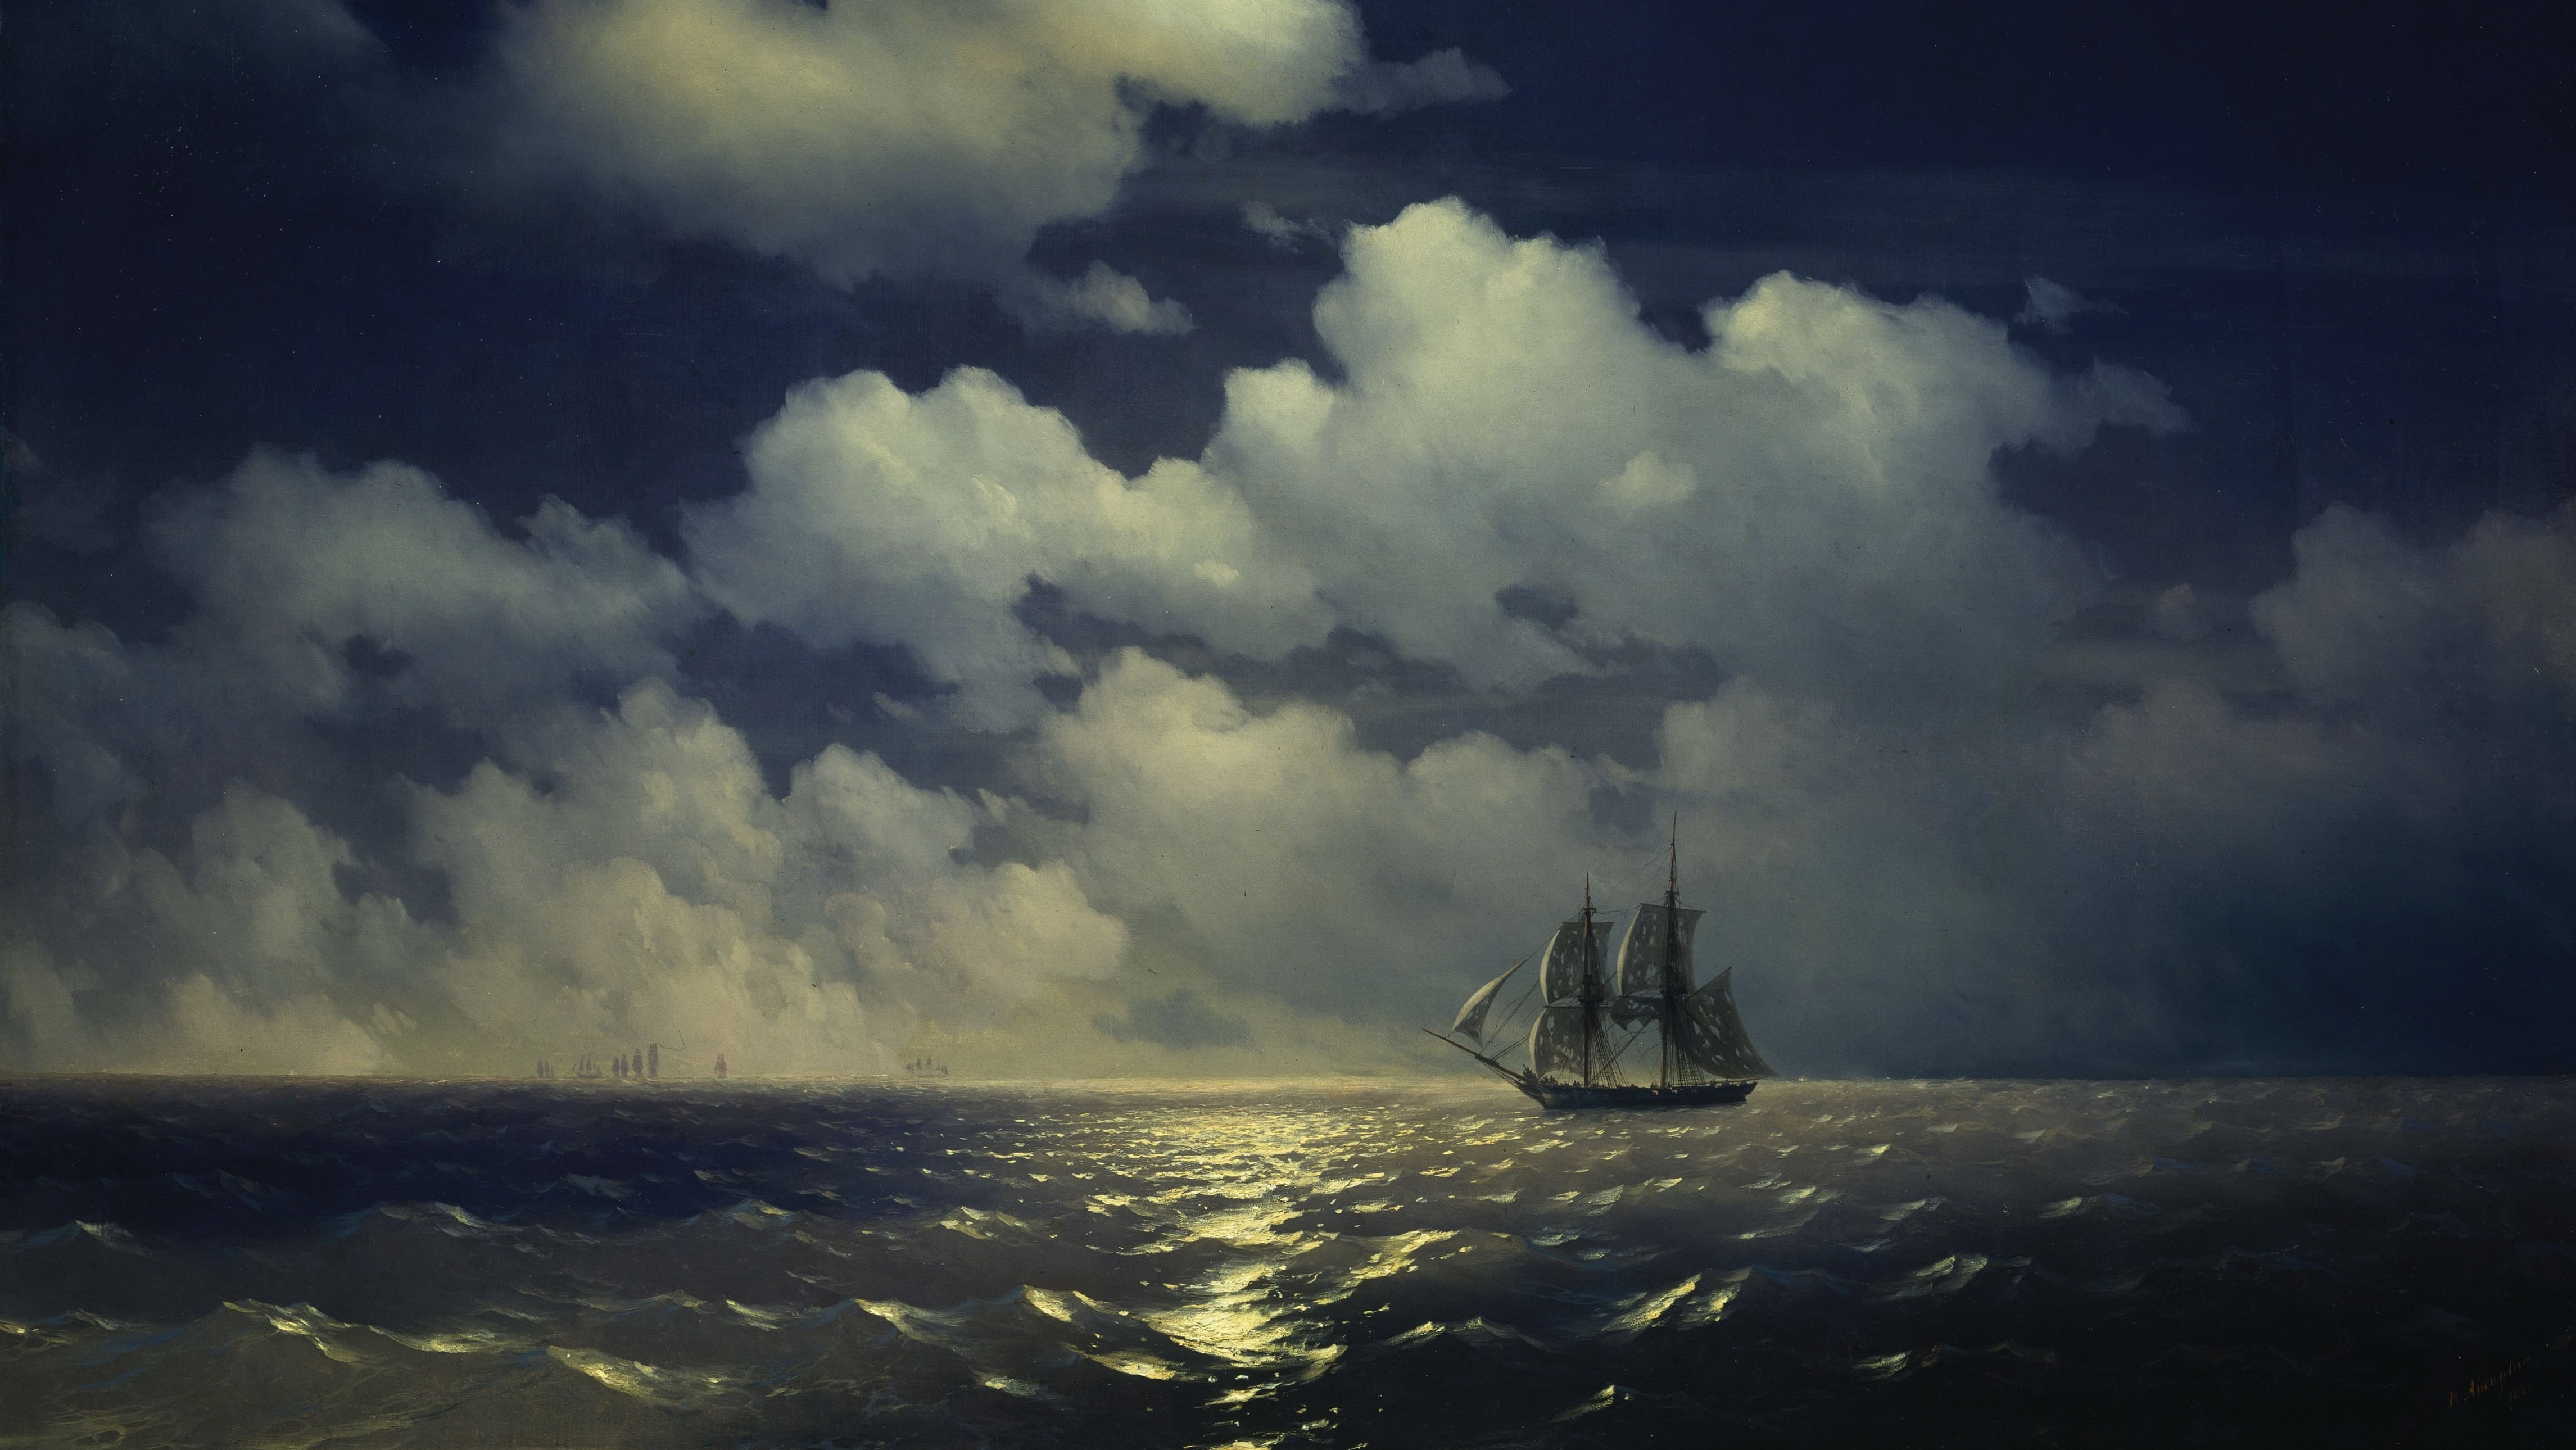 sailing ship, ocean view, Ivan Aivazovsky, clouds, waves, calm waters